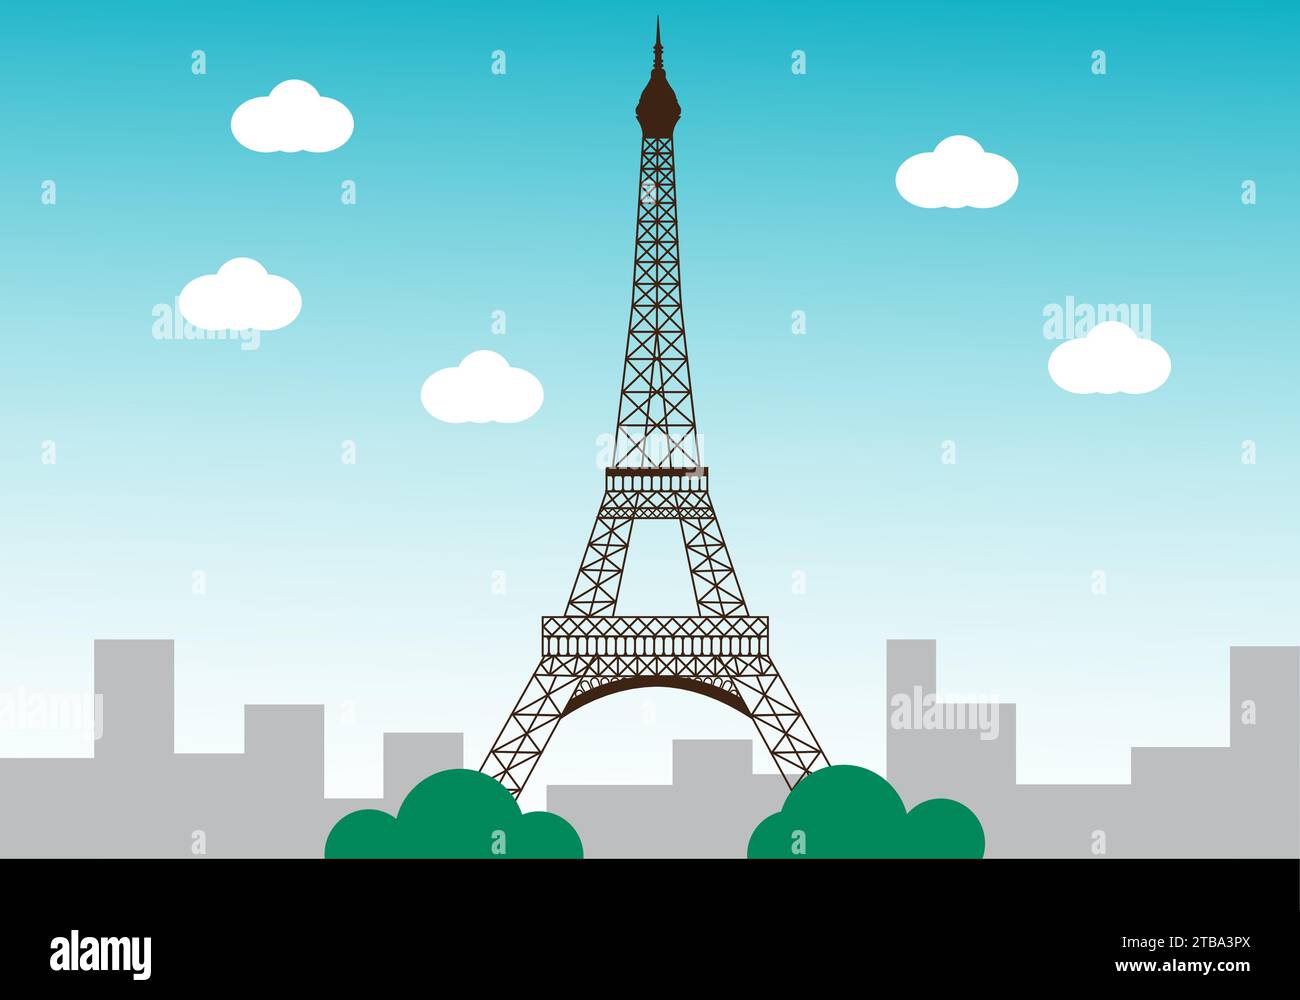 Eiffel tower with city vector illustration Stock Vector